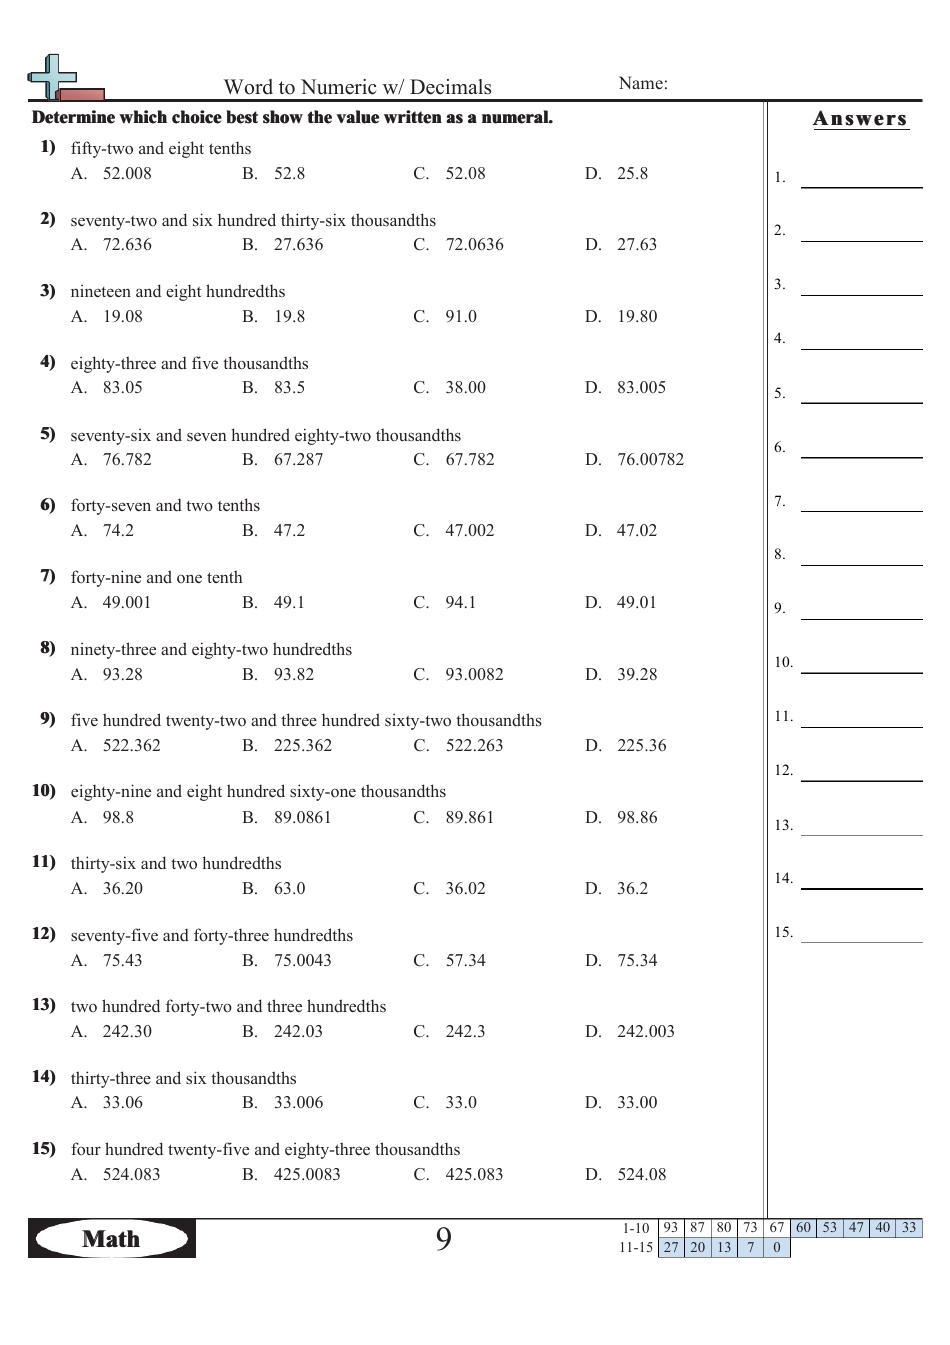 Word to Numeric W/Decimals Worksheet With Answers preview image